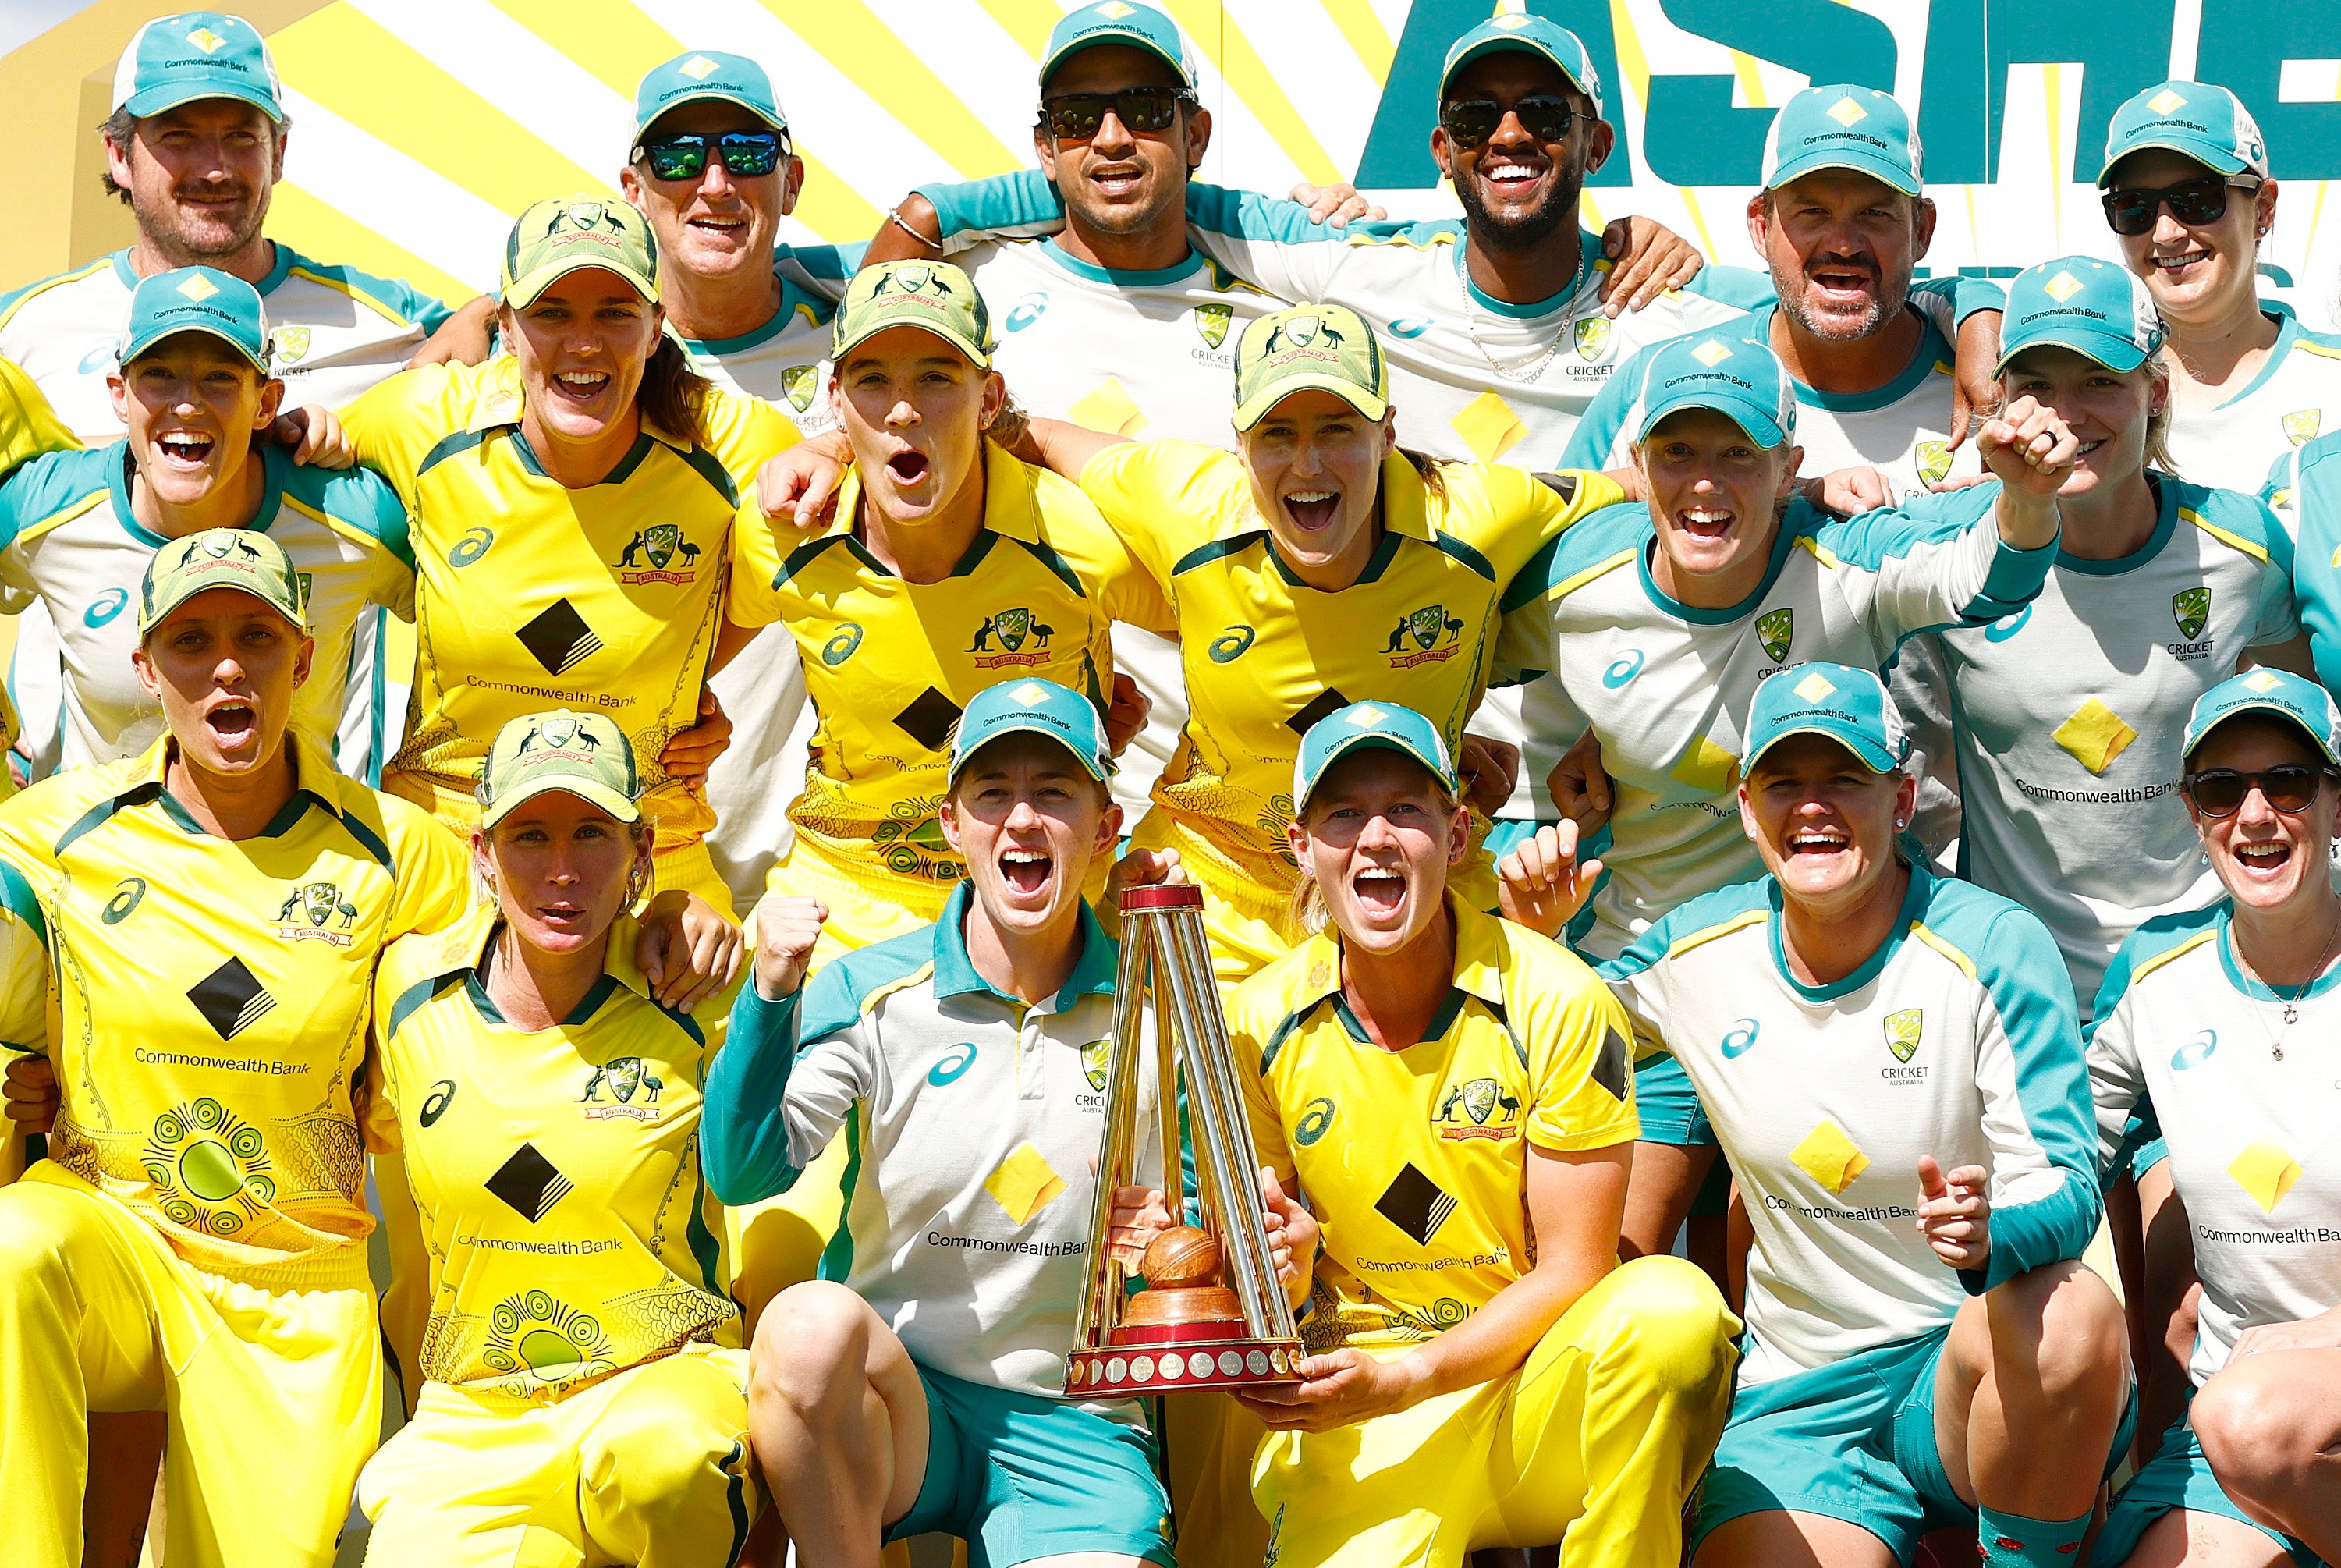 Australia celebrates winning game three and the Women’s Ashes after final ODI victory in Melbourne